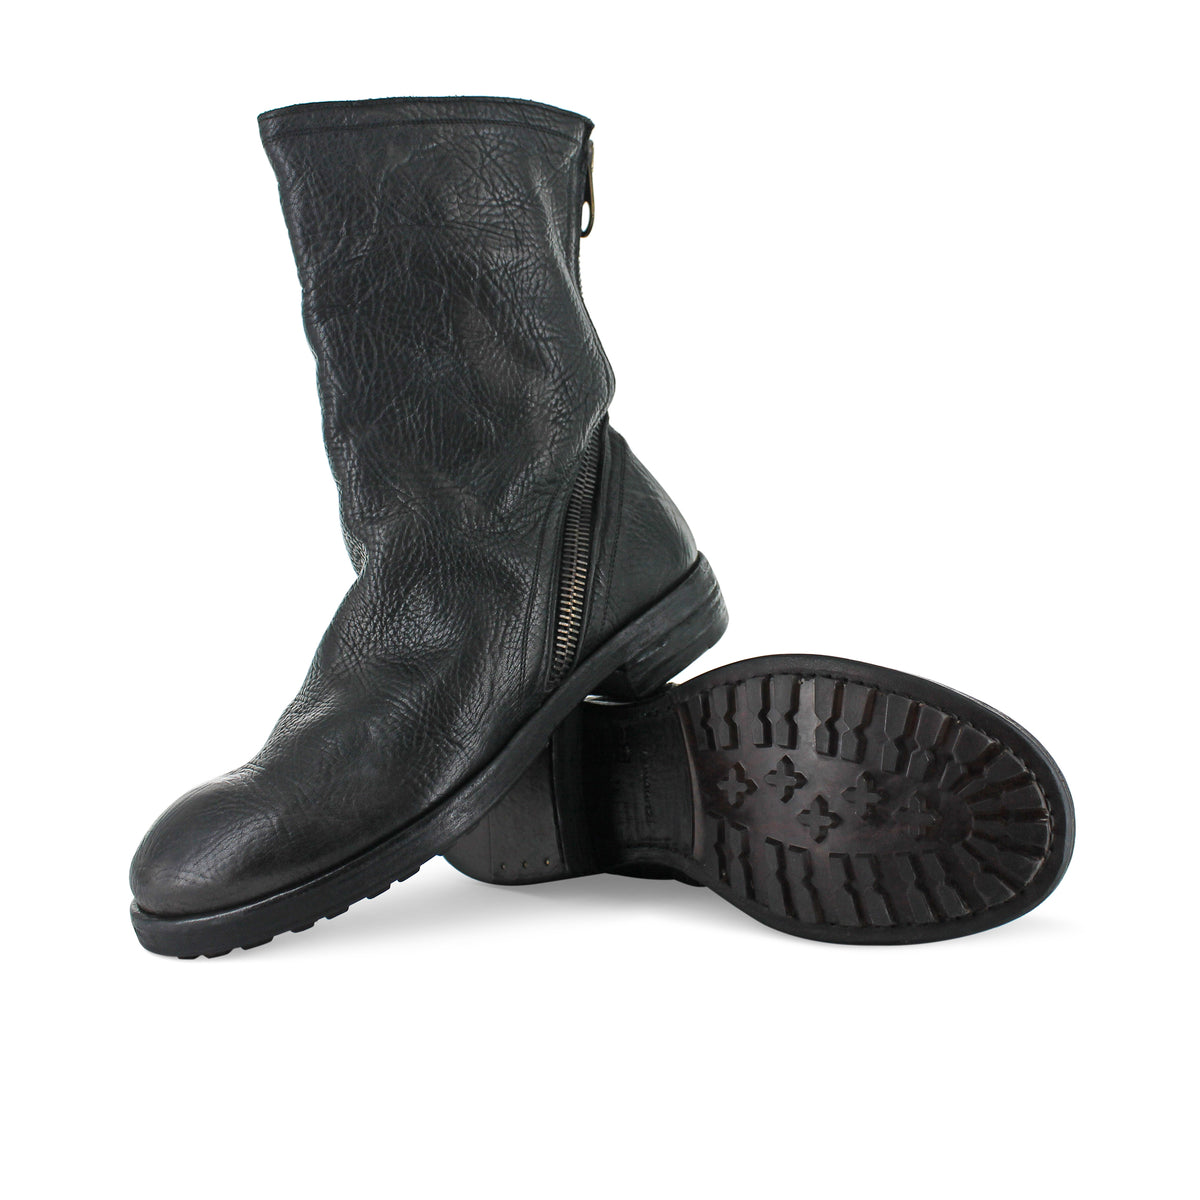 Maurizi - Grained Leather High Boot